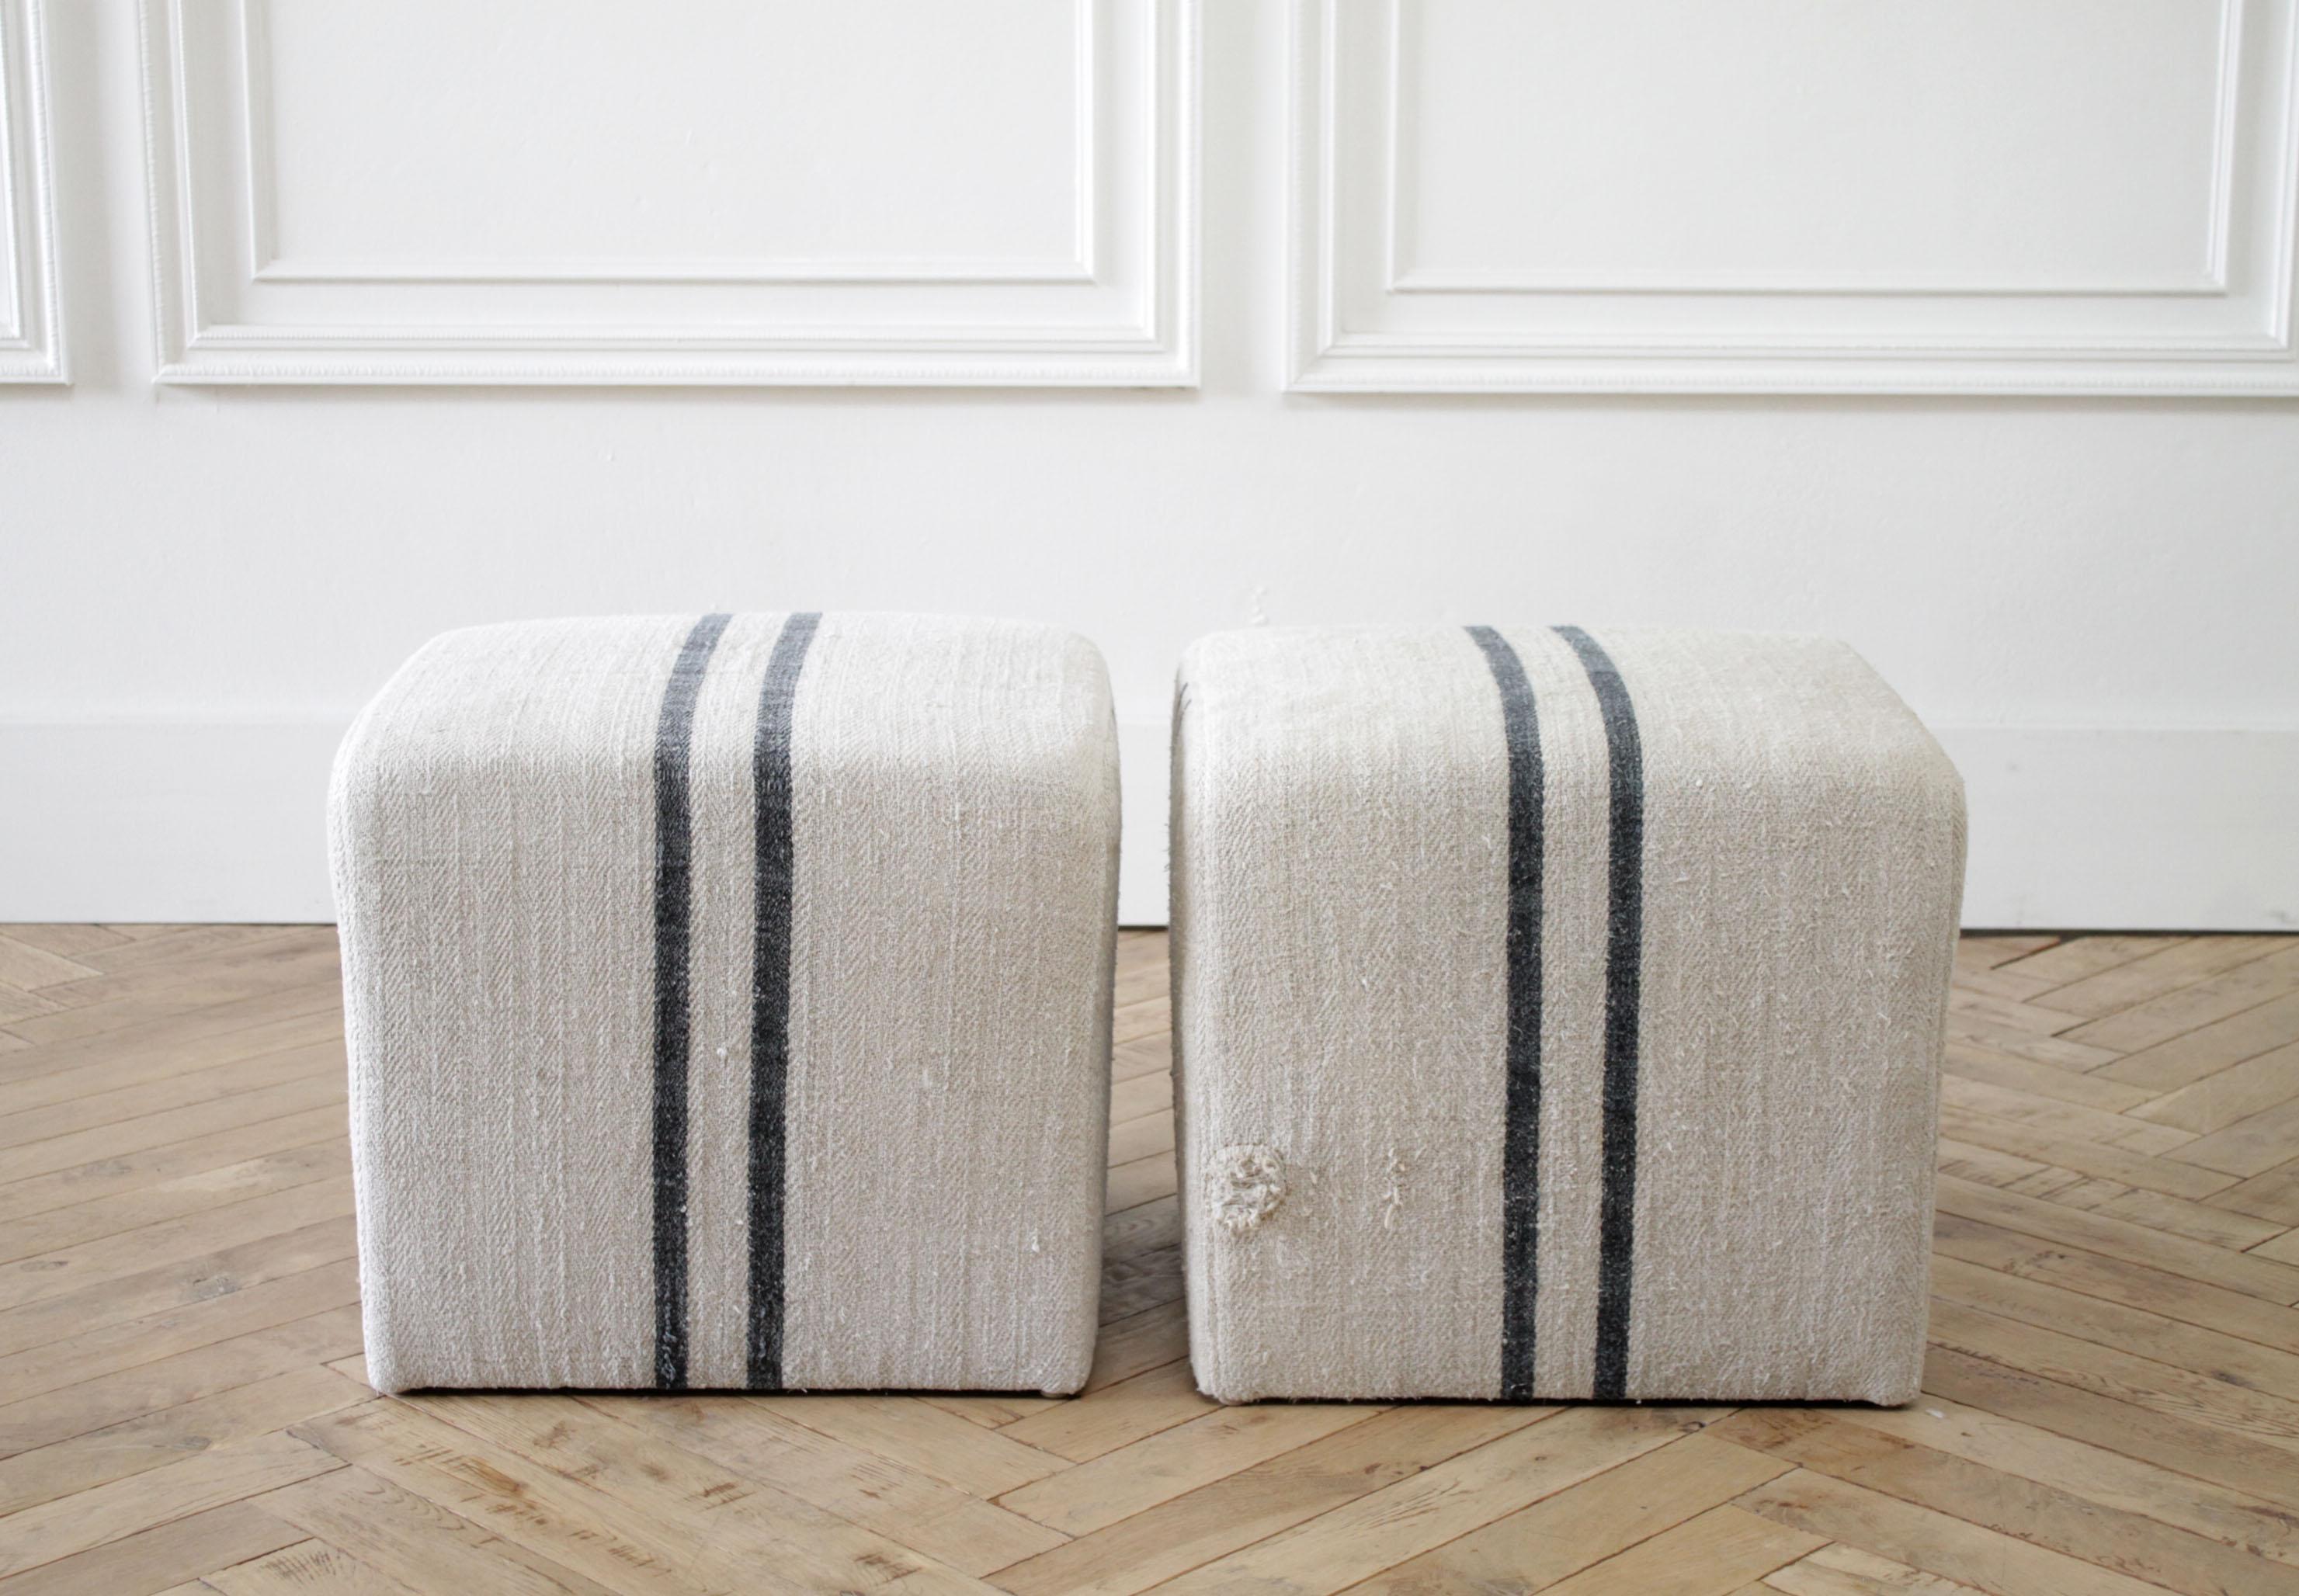 Custom upholstered cube ottomans in natural grain sack with black stripe
Fabric is vintage, one of a kind. These European Grainsacks or farm bags were used to hold grains, and have original
patches, stitching, and other markings. Each one is very